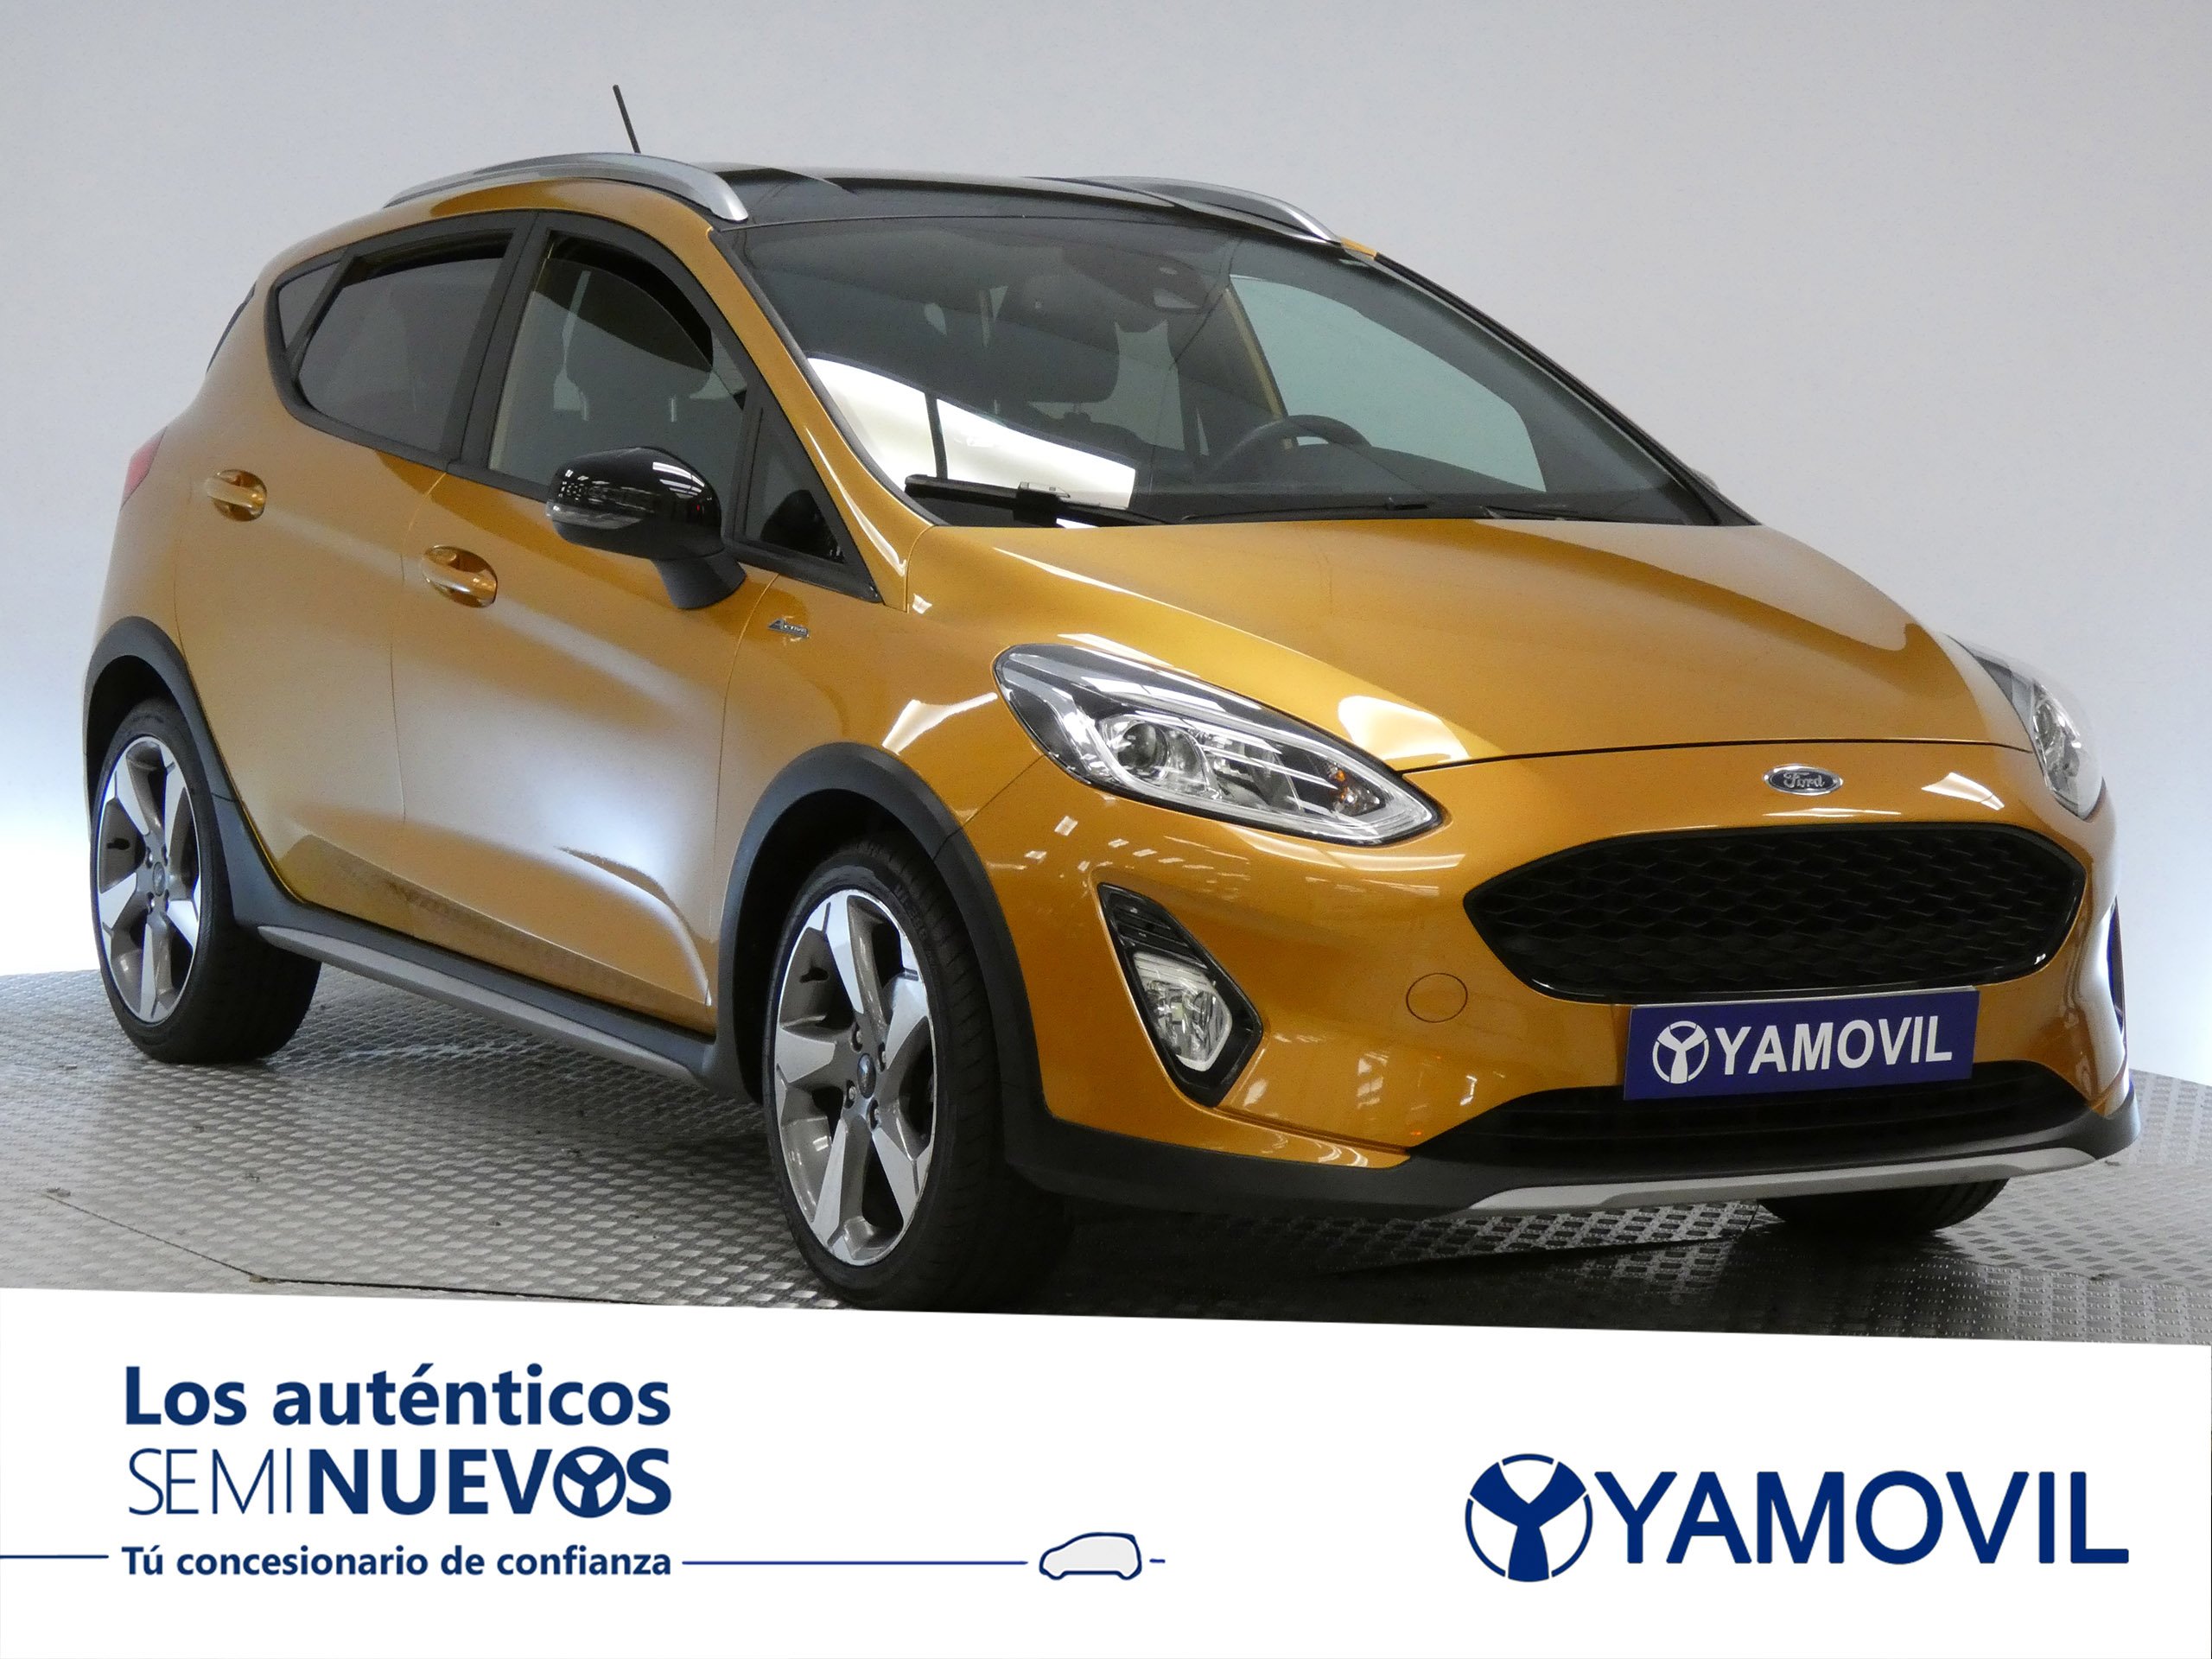 Ford Fiesta ACTIVE LUX 1.0 ECOBOOST 5P - Foto 2